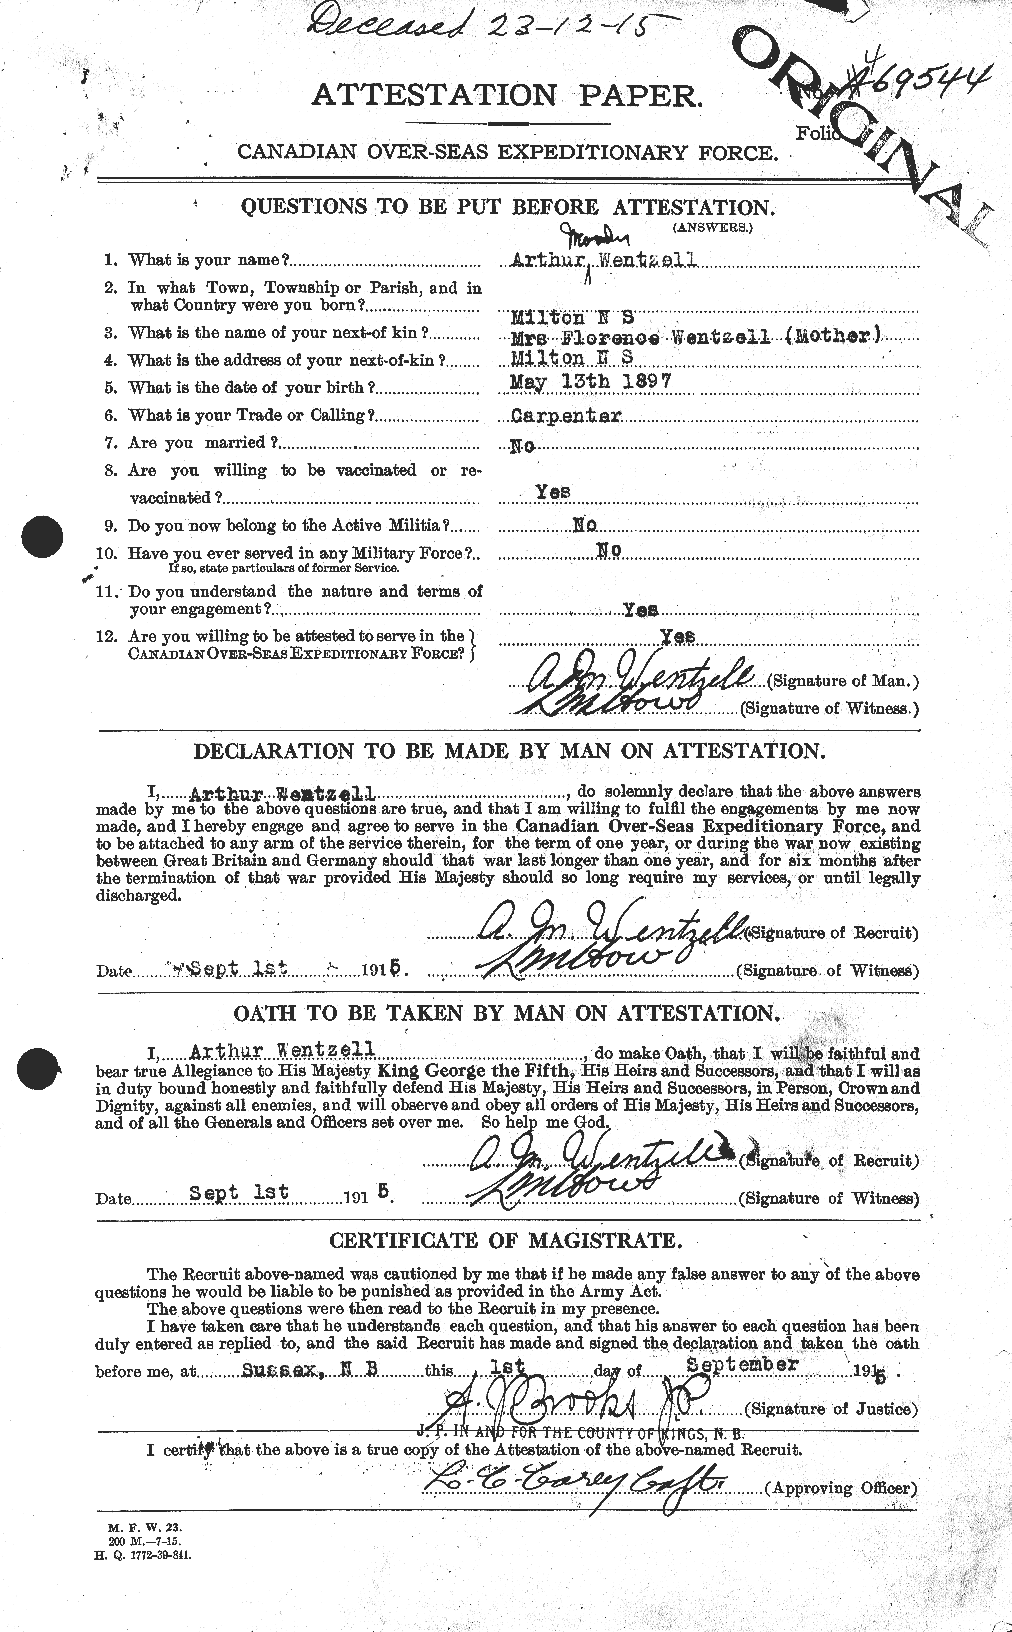 Personnel Records of the First World War - CEF 664642a